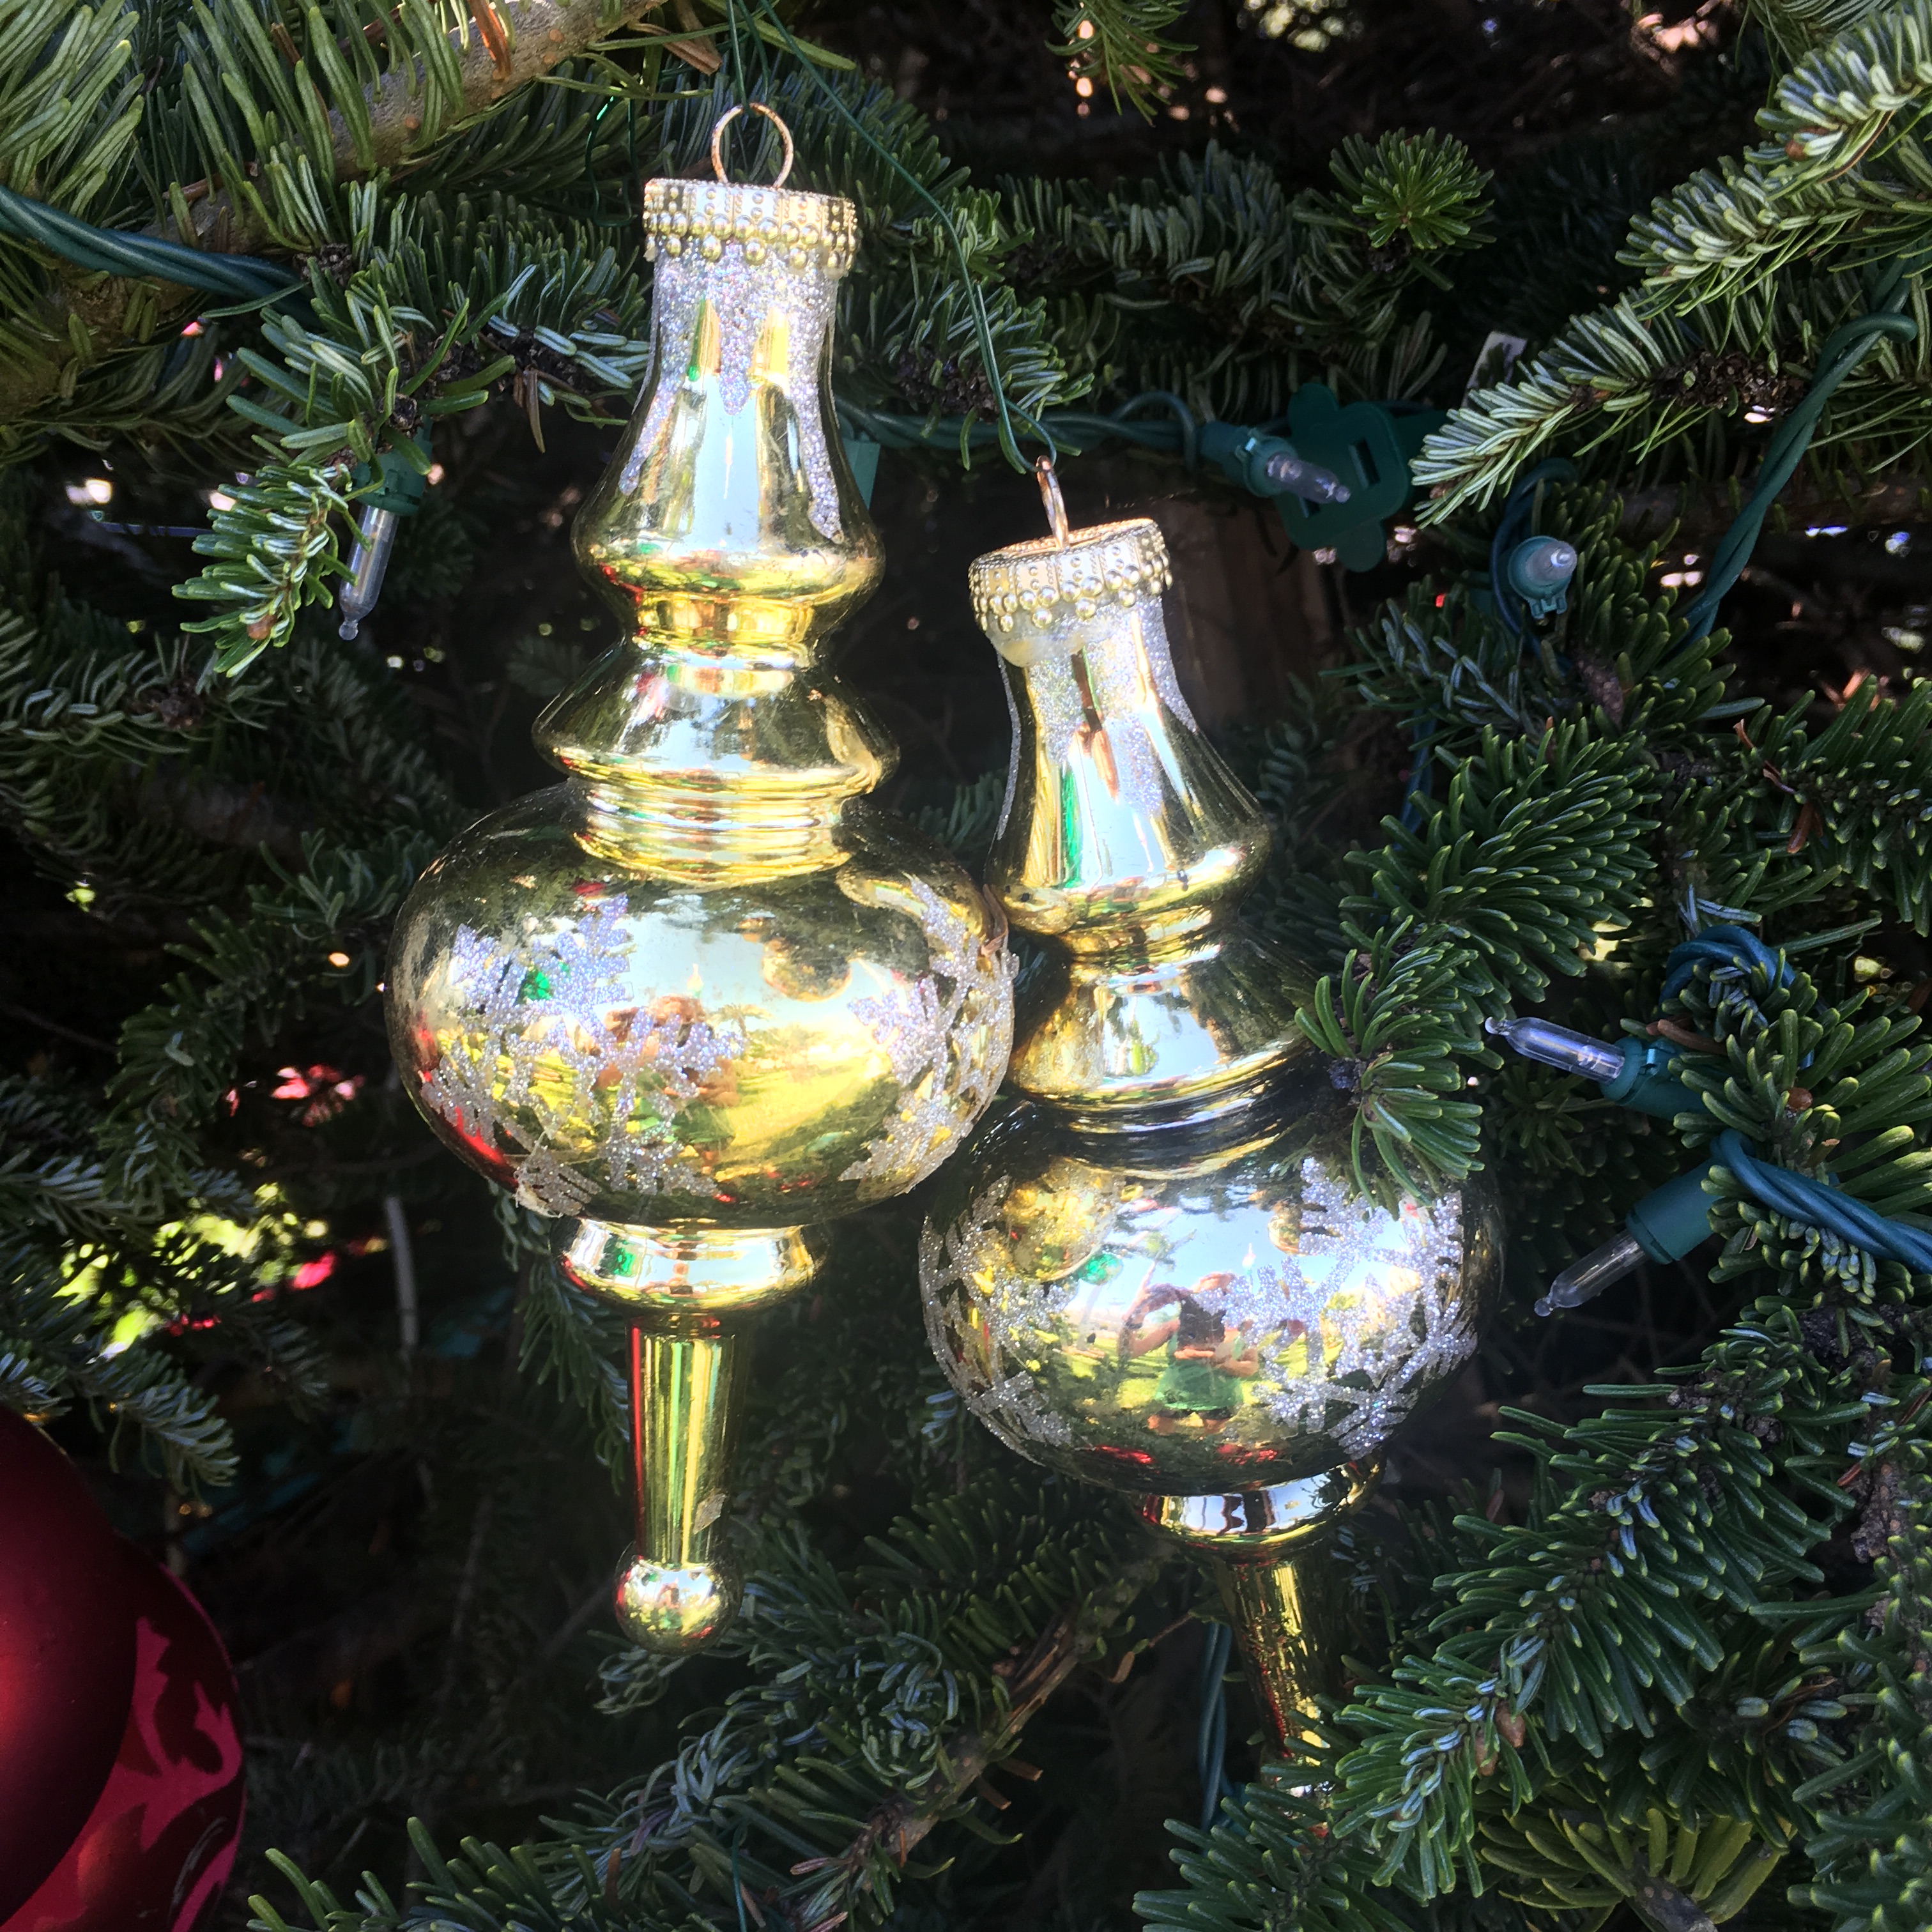 A pair of silver bells on an outdoor natural Christmas tree.